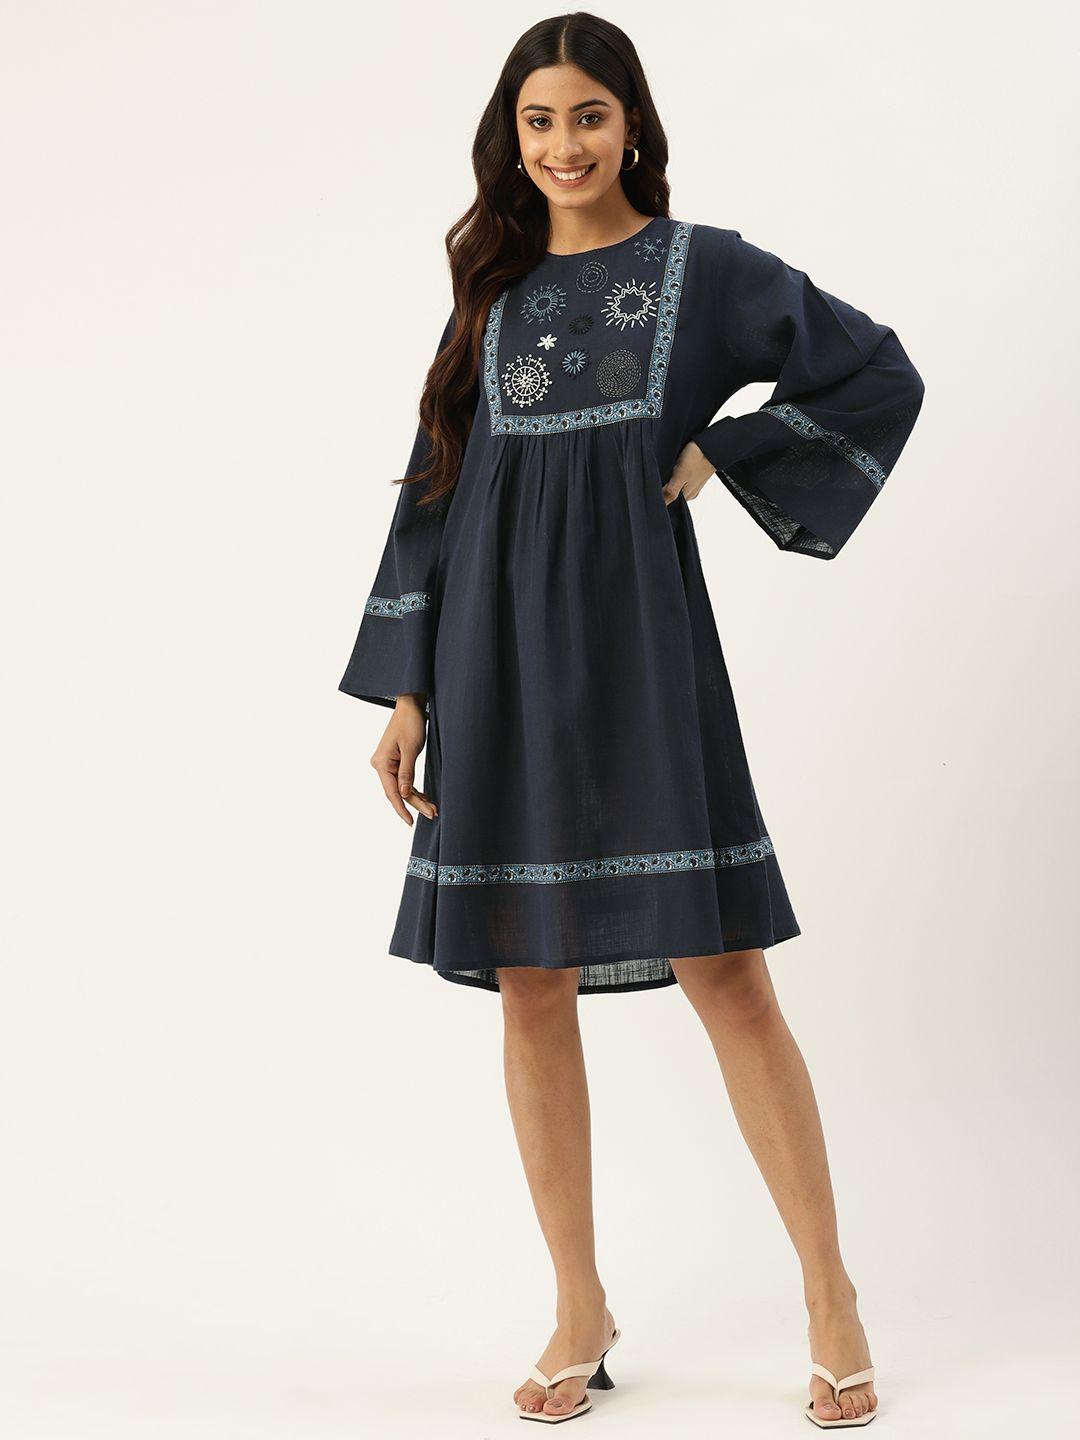 rangdeep floral embroidered flared sleeves ethnic dress